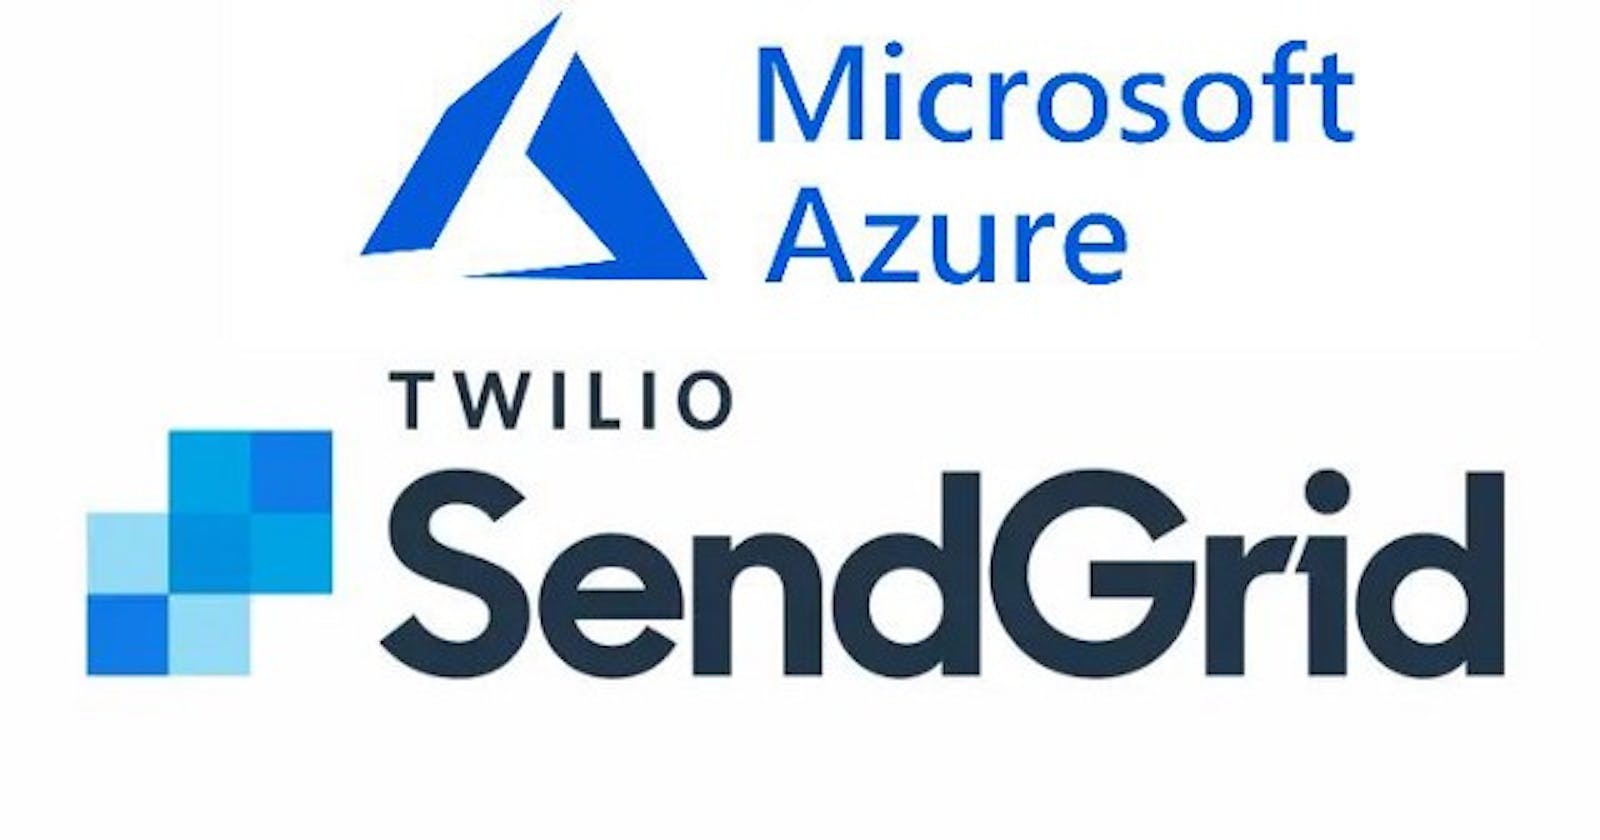 Sending emails from your application with easy and secure way using Azure Sendgrid service